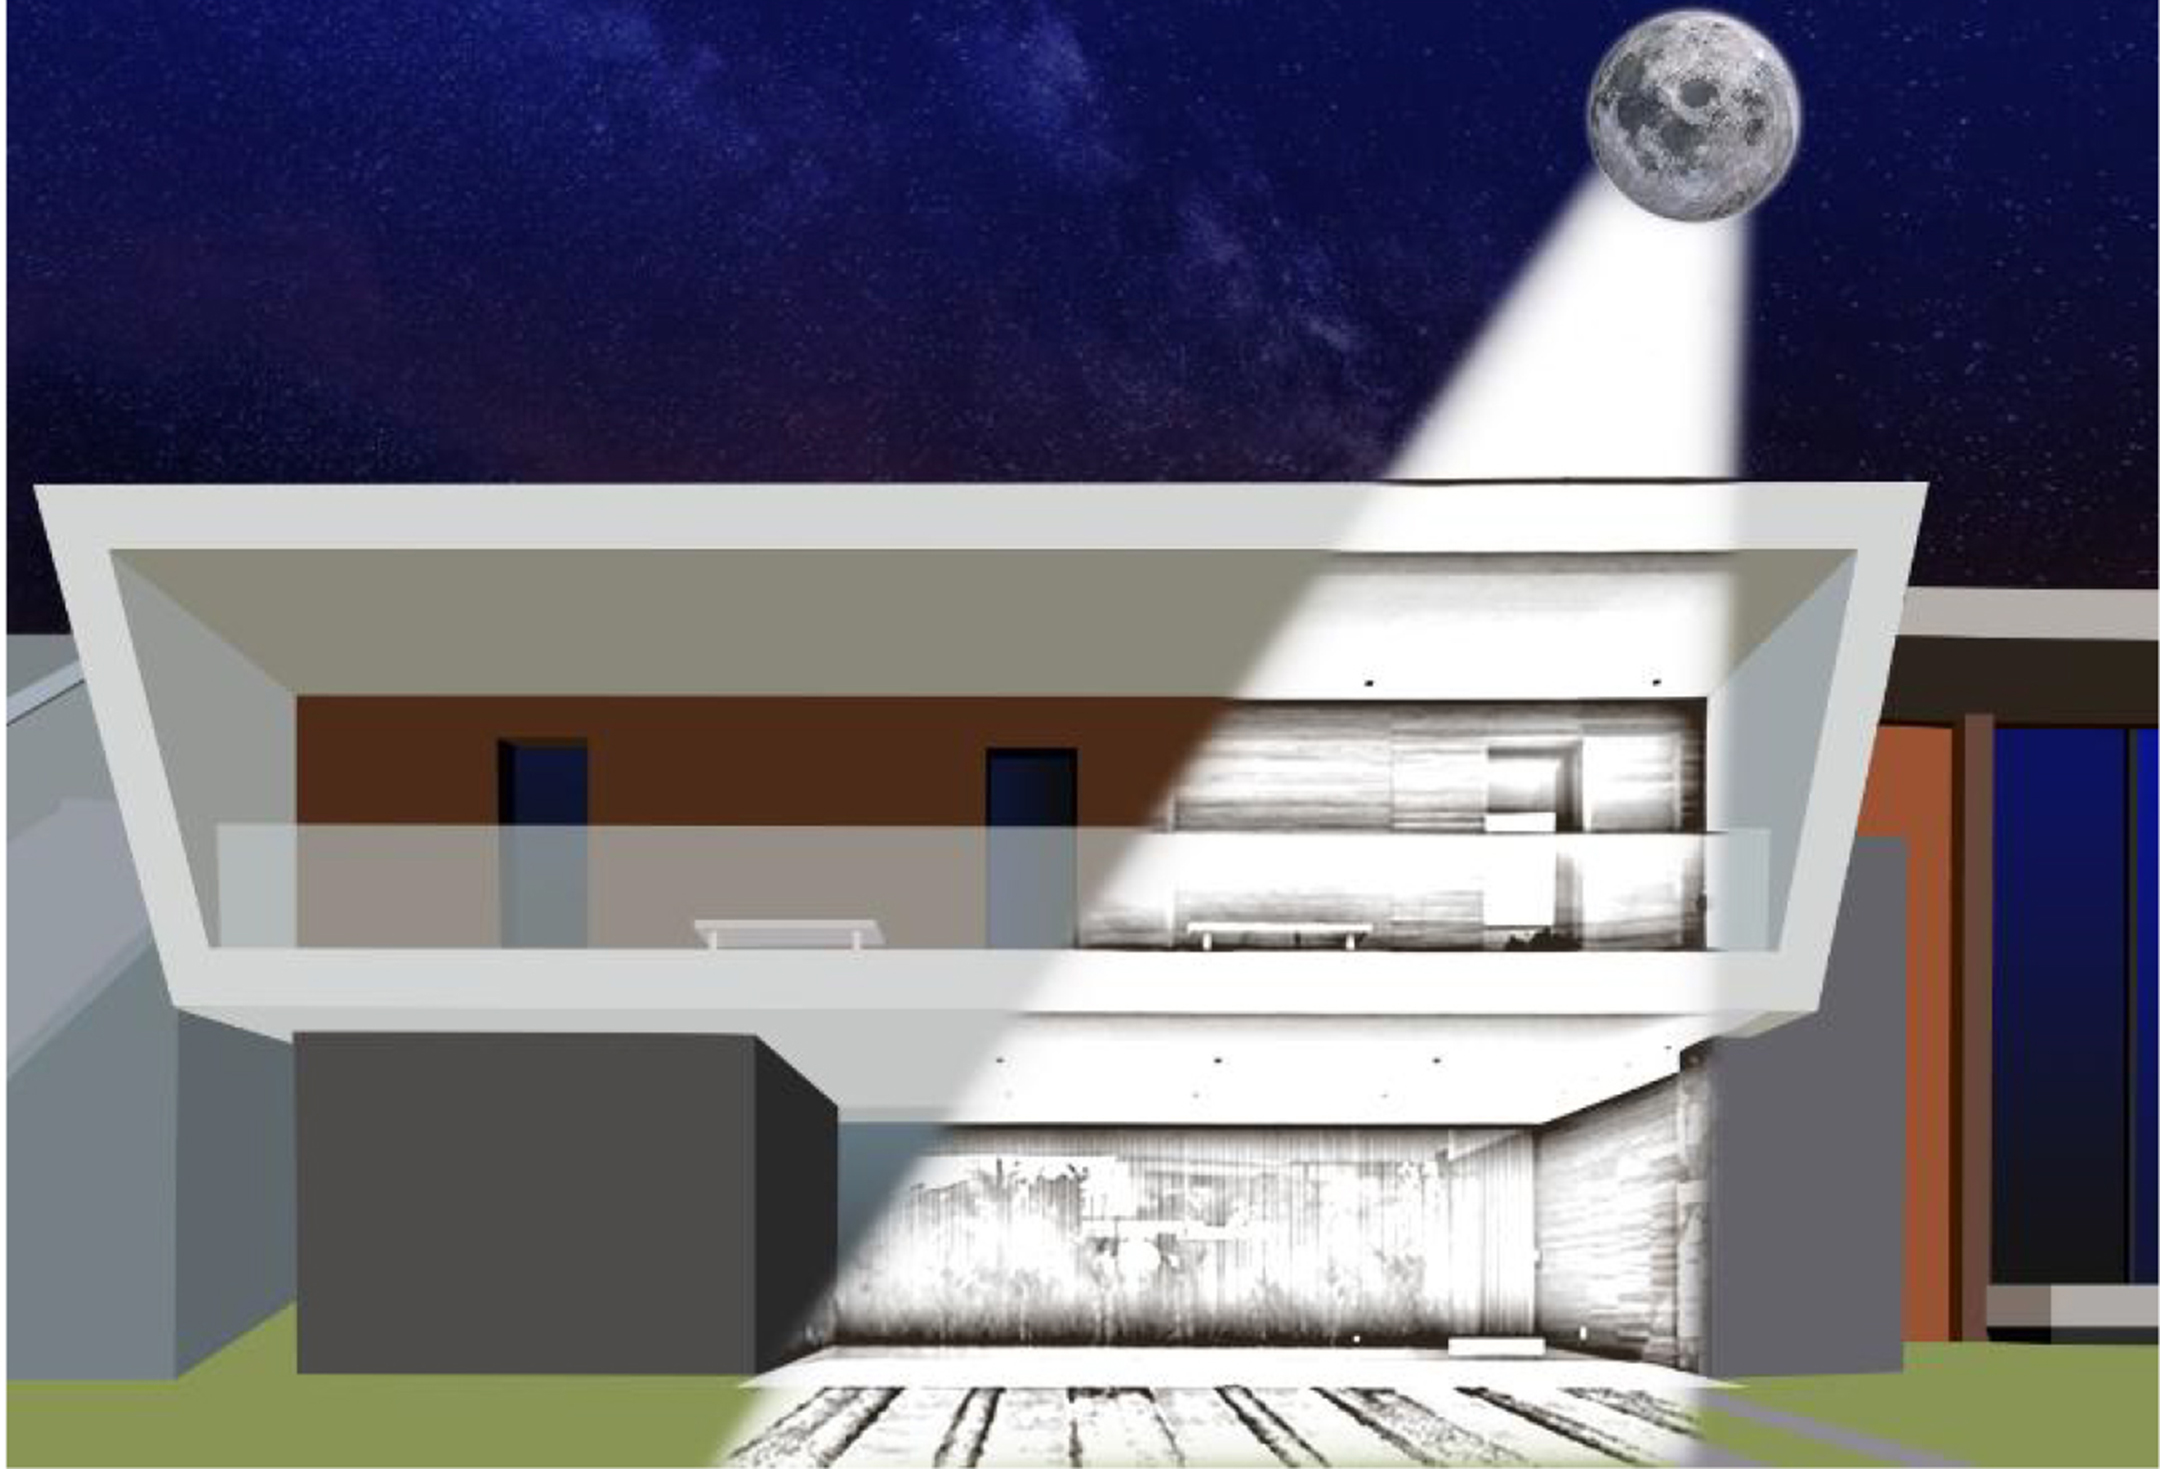 illustration of a house illuminated by a moon at the top right in the sky